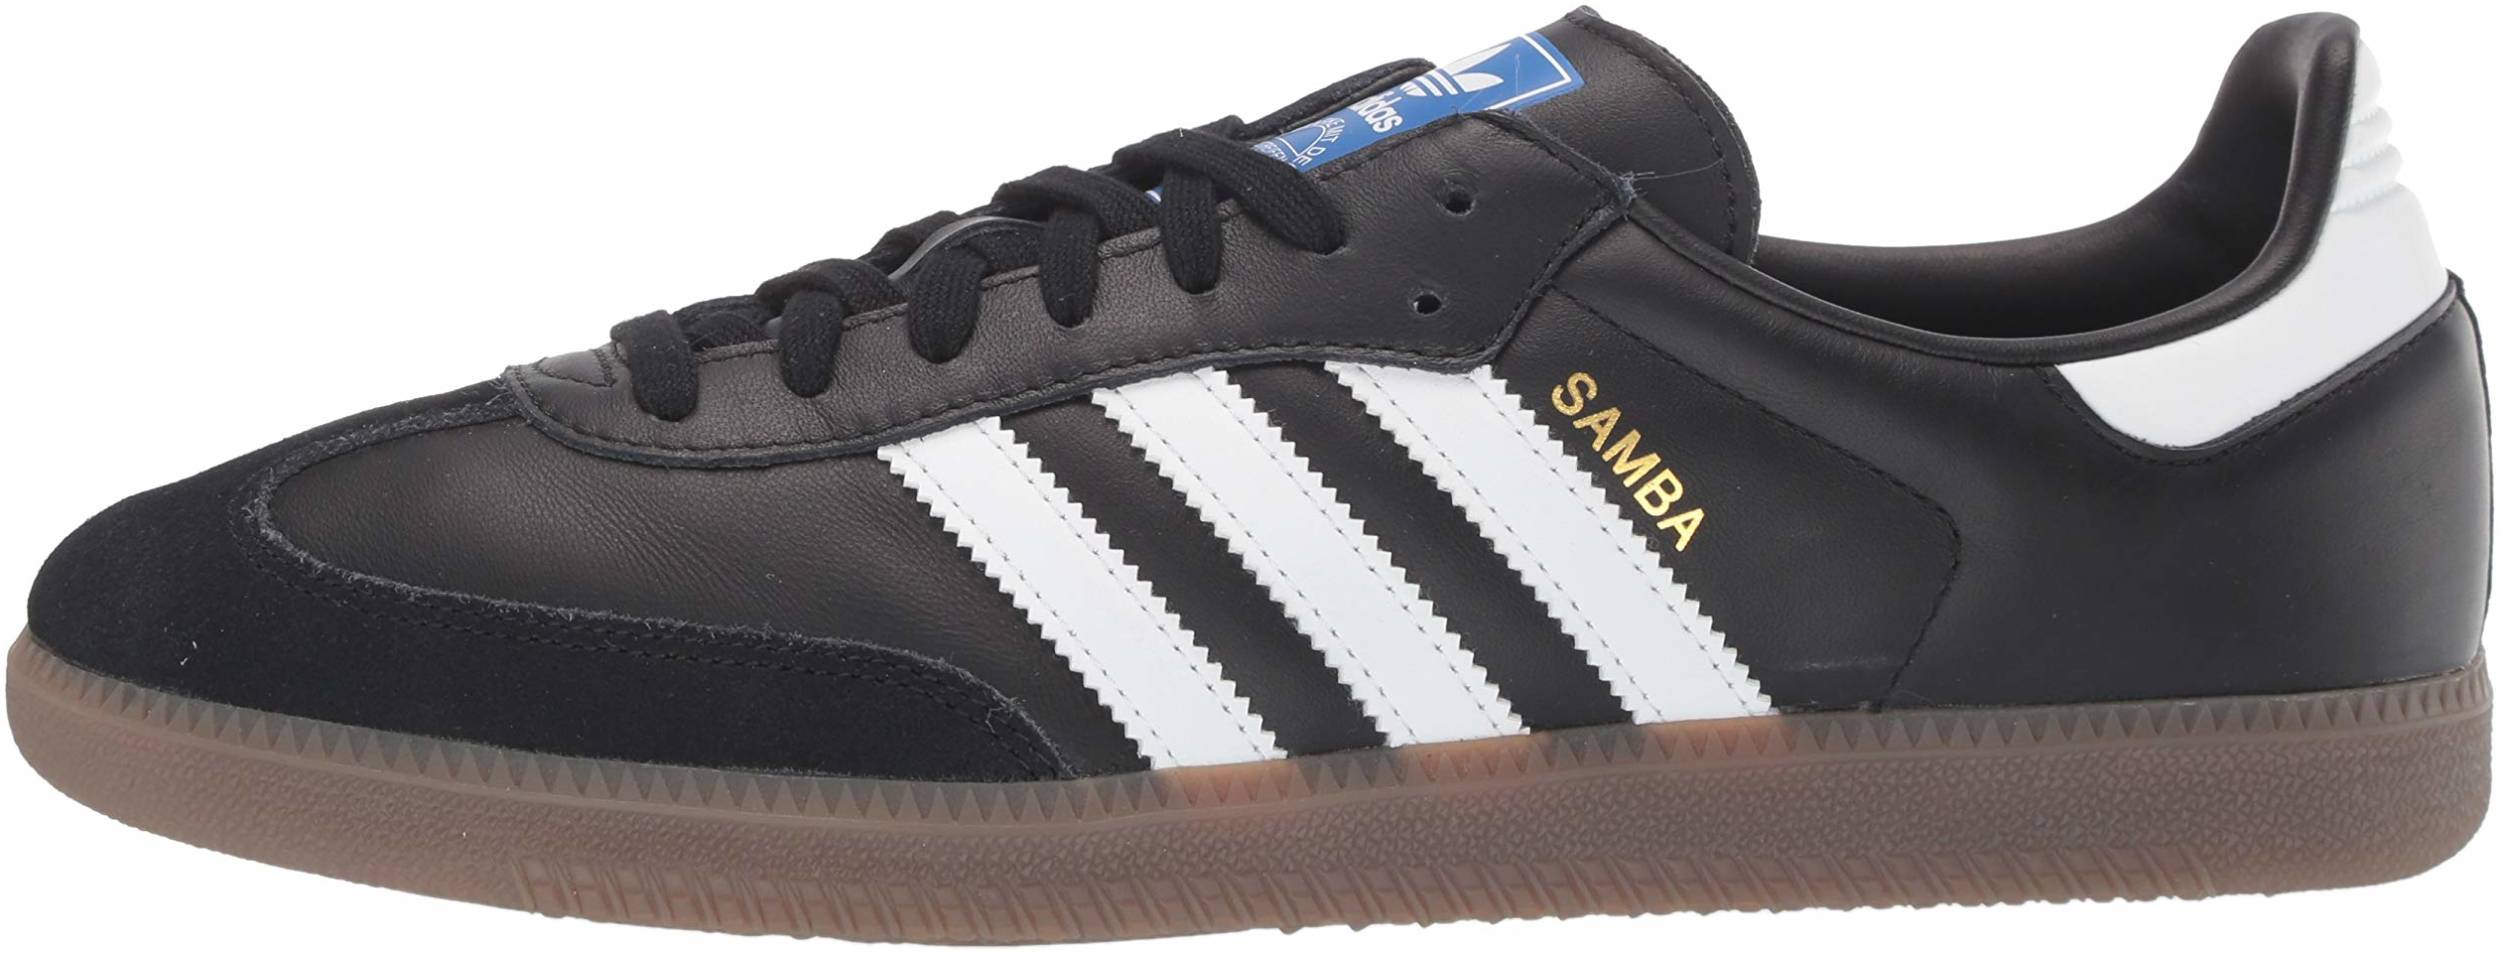 Only $57 + Review of Adidas Samba 